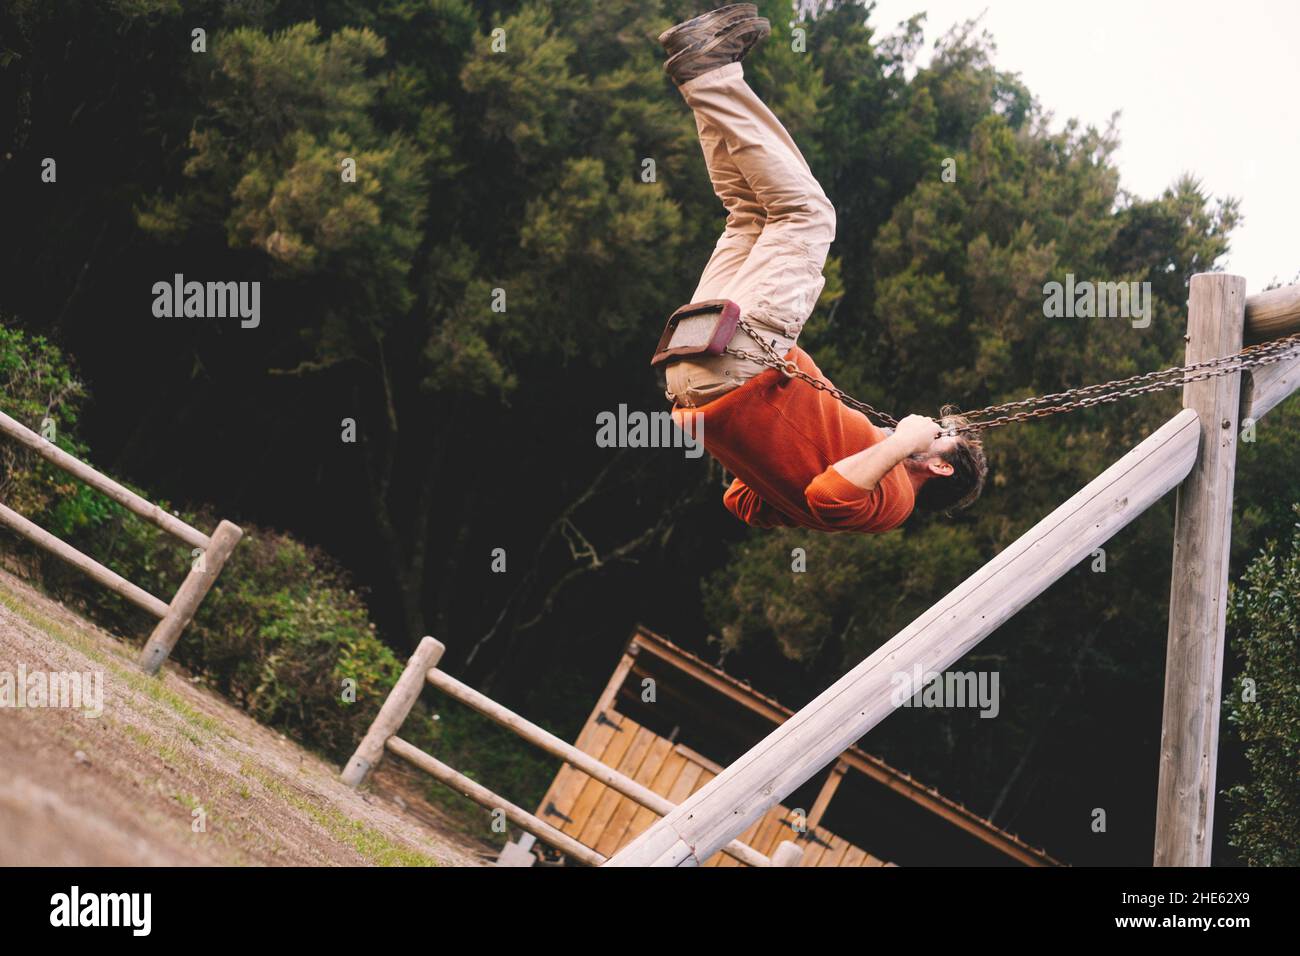 Adult man play and have fun flying high on swing at the park - happy aged people enjoying outdoors freedom concept lifestyle Stock Photo